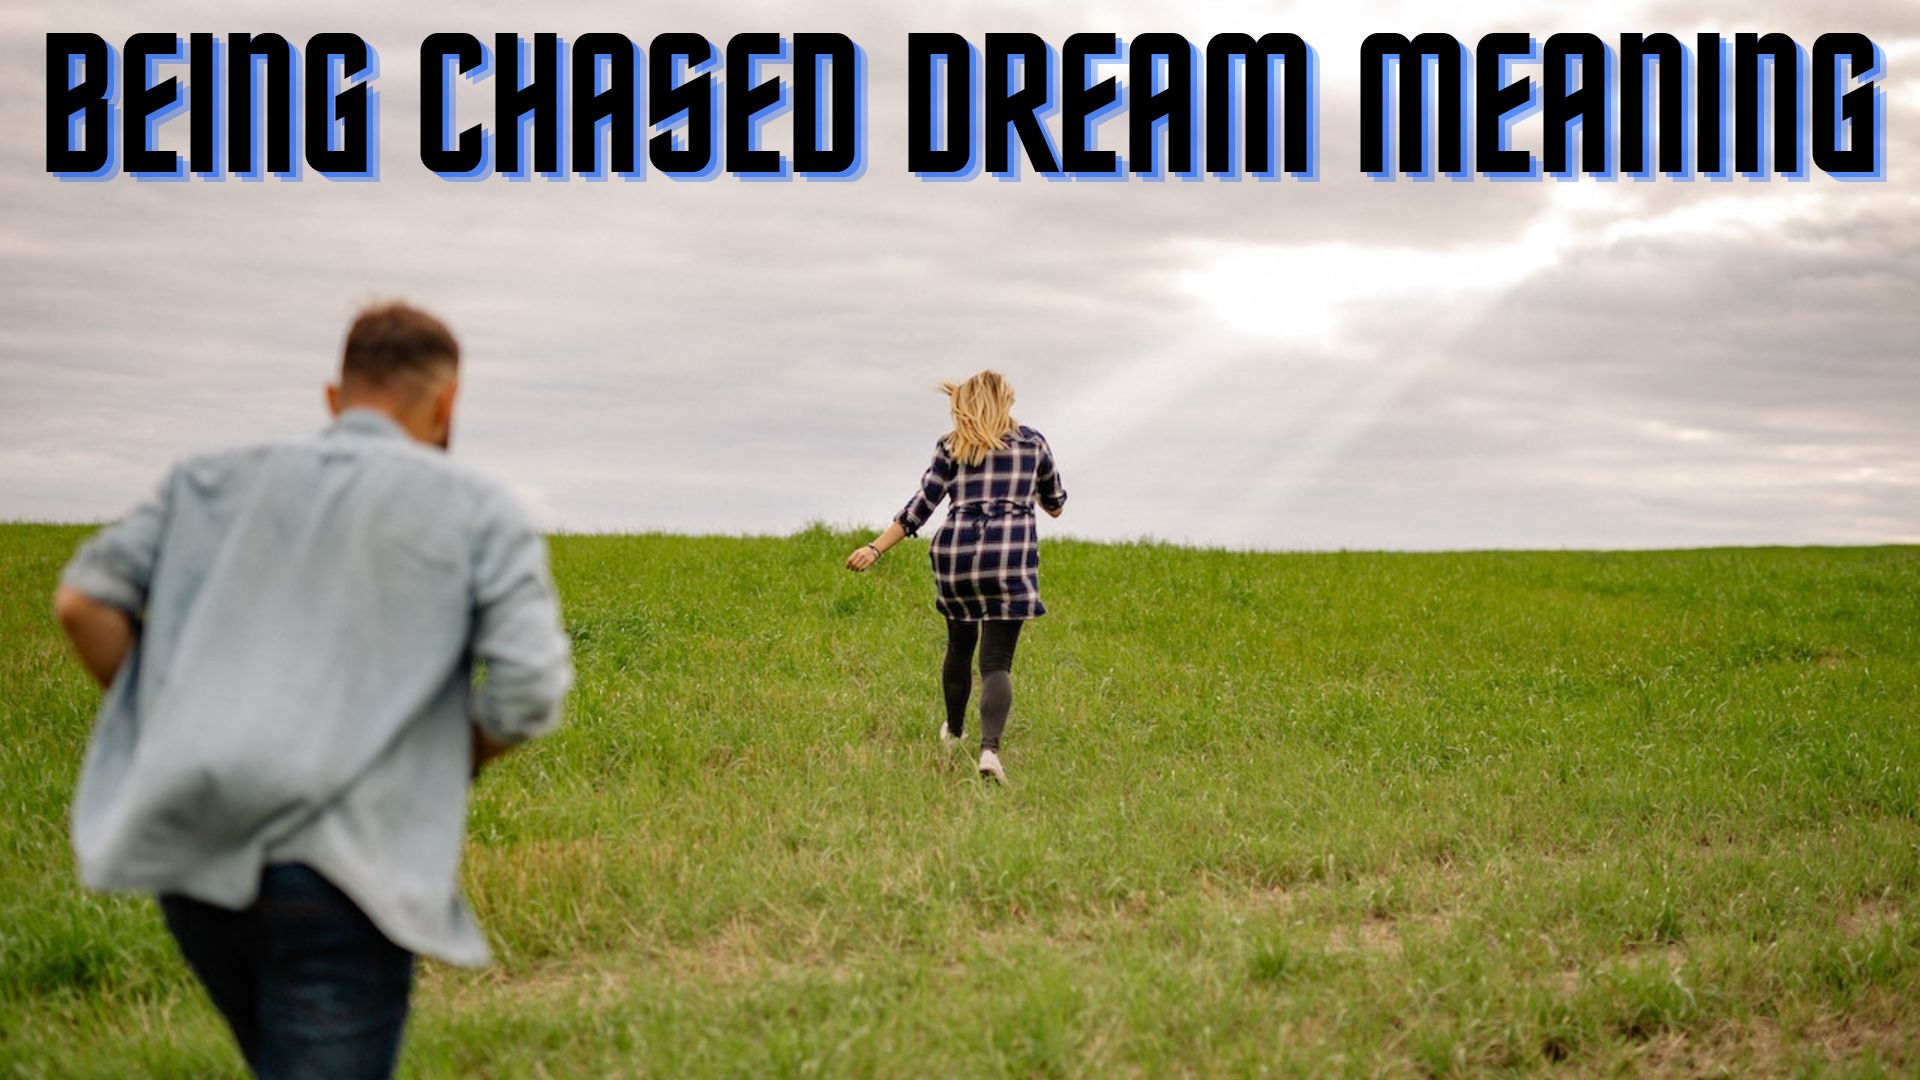 Being Chased Dream Meaning - Signify Pursuing A Goal